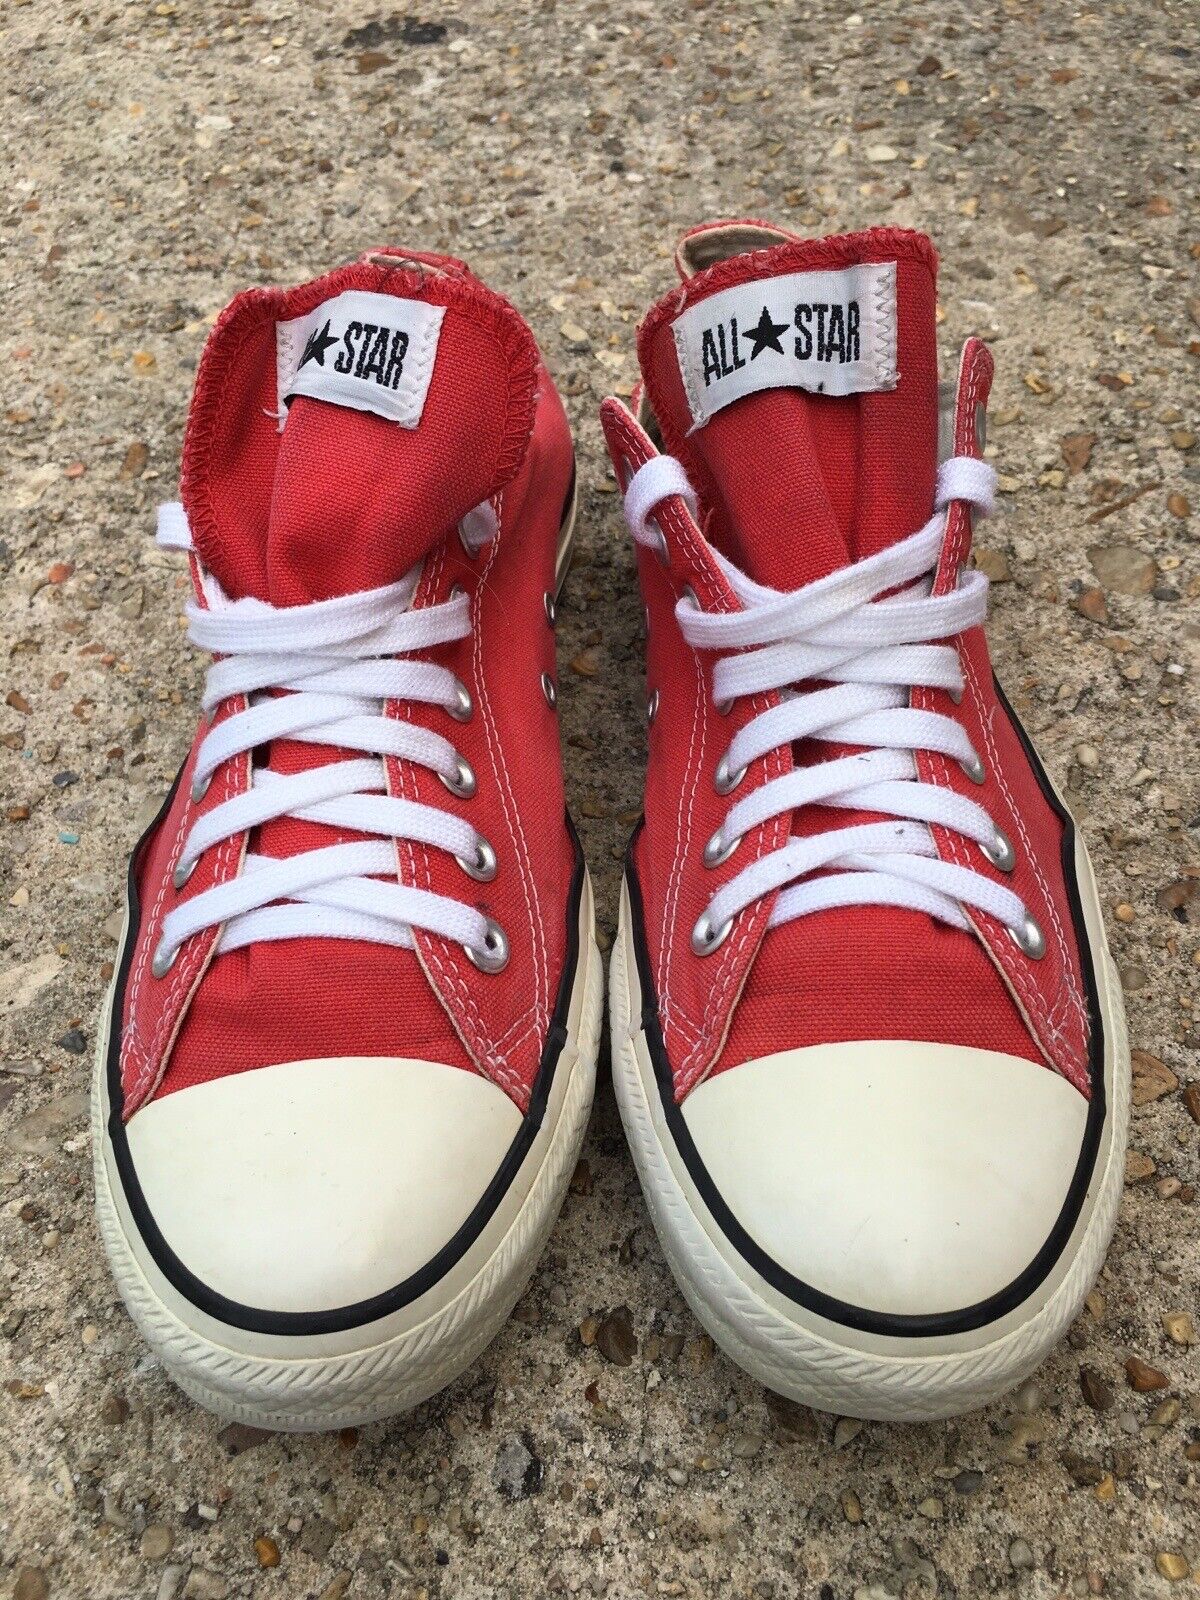 Converse All Star Red Low Top Sneakers shoes size - image 6